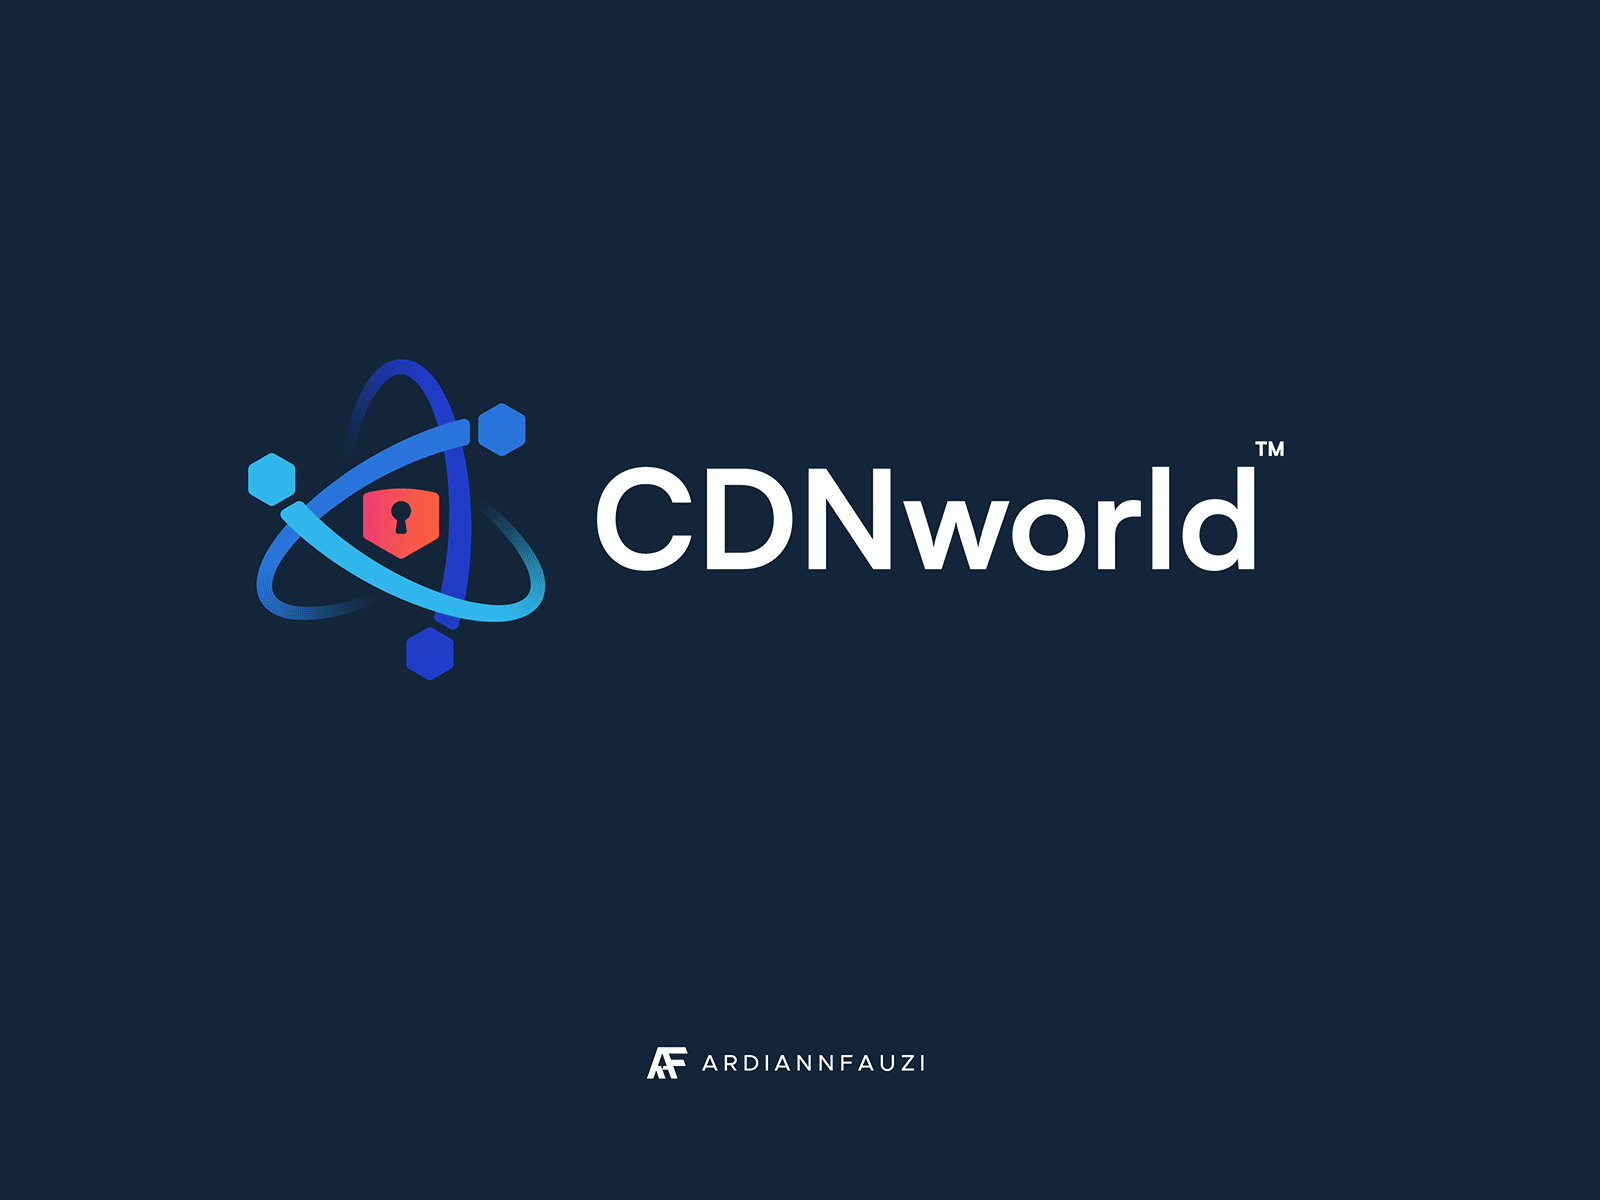 CDNWorld Logo Approved asset cdn css dns fast global hosting html images internet lock logo network programming protection security selection server speed trajectory